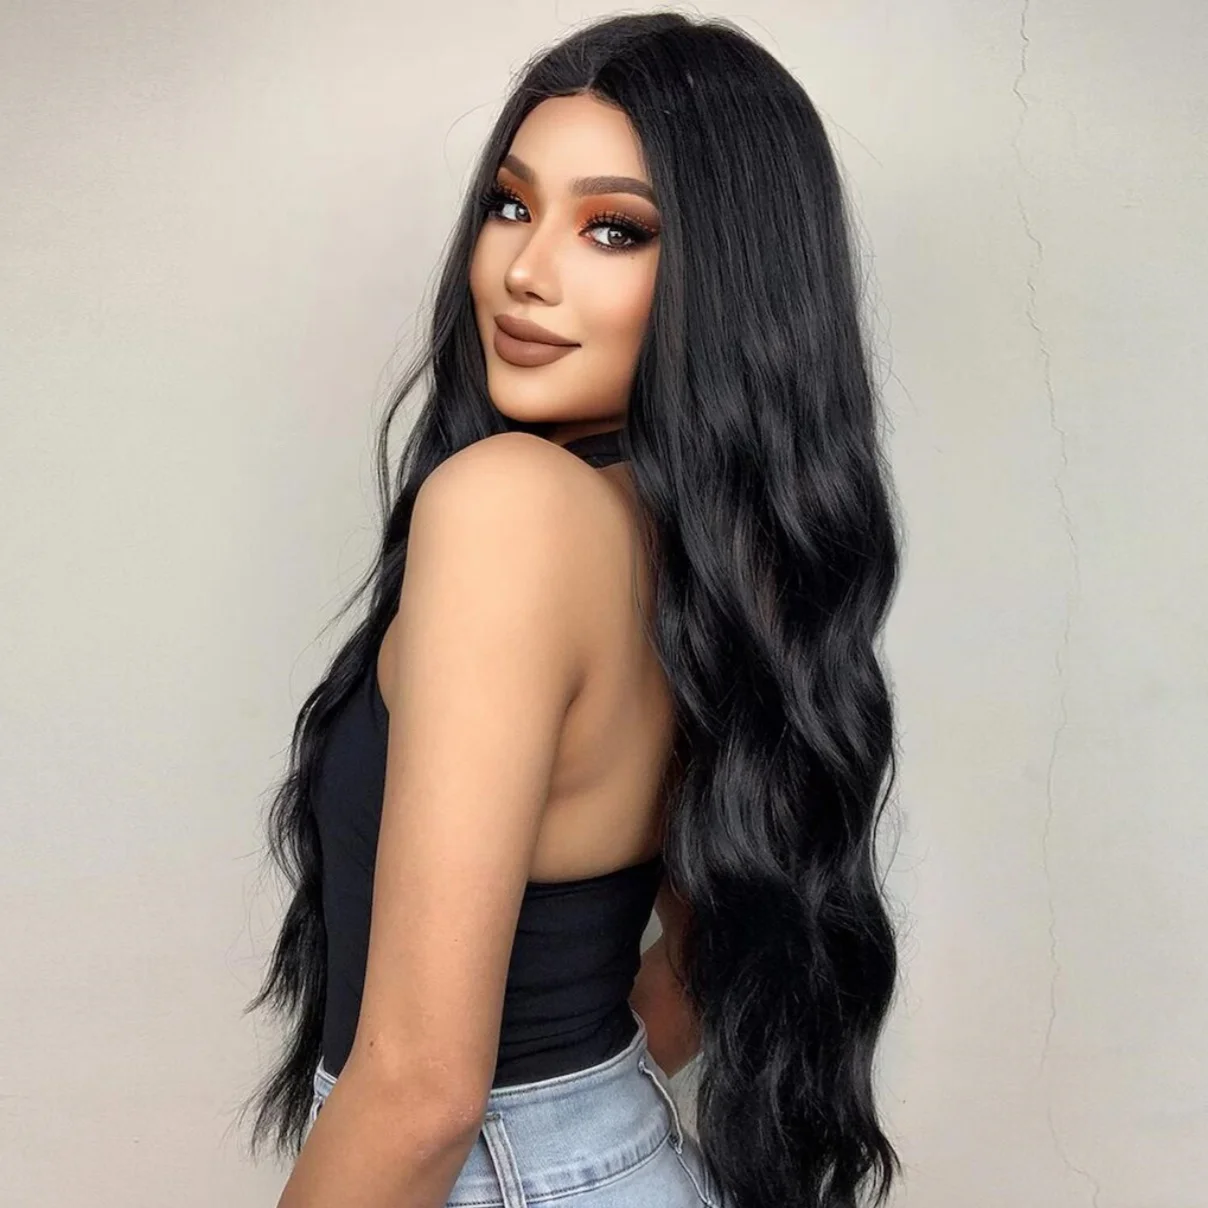 long-body-wave-180-density-26inch-black-lace-front-wig-for-black-women-baby-hair-heat-resistant-glueless-daily-wig